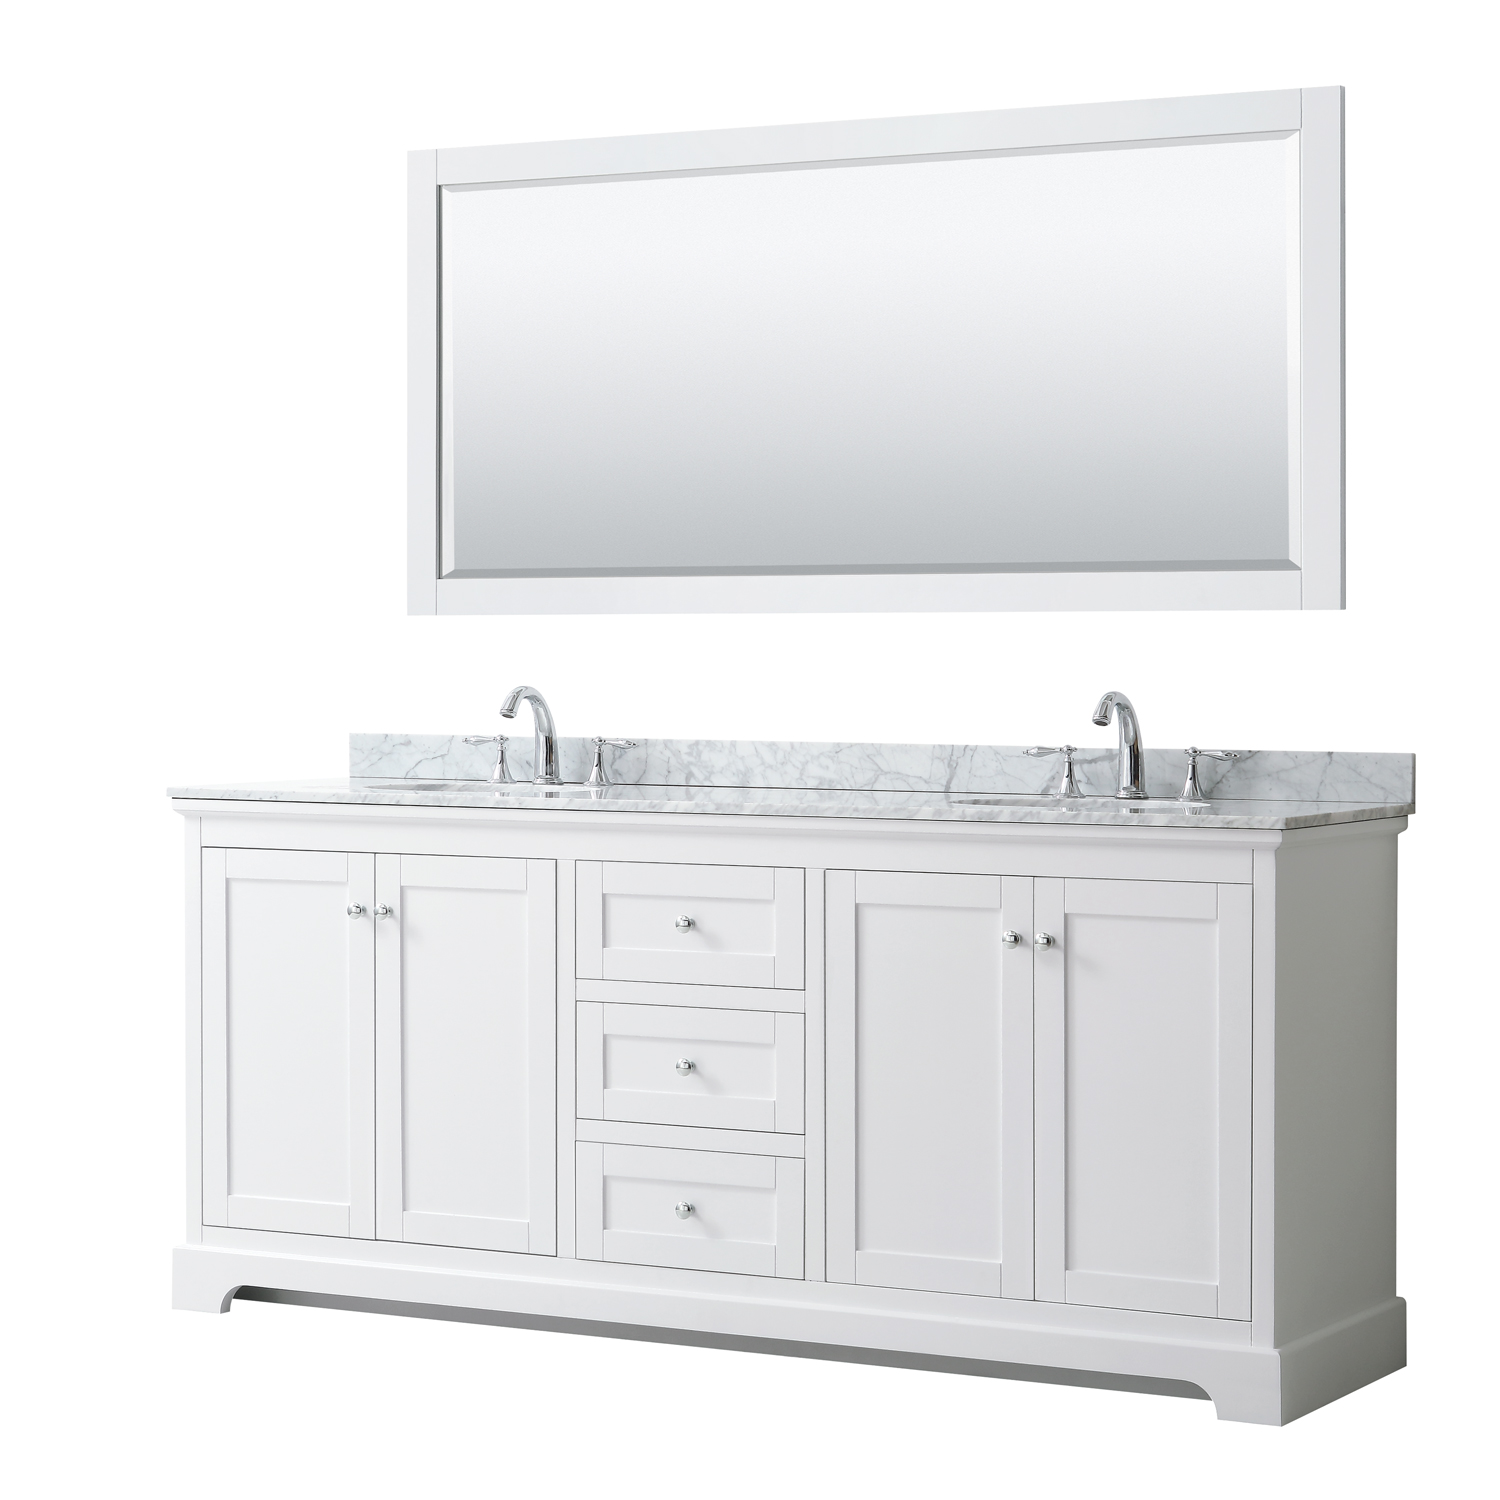 Avery 80 Double Bathroom Vanity By Wyndham Collection White Beautiful Bathroom Furniture For Every Home Wyndham Collection